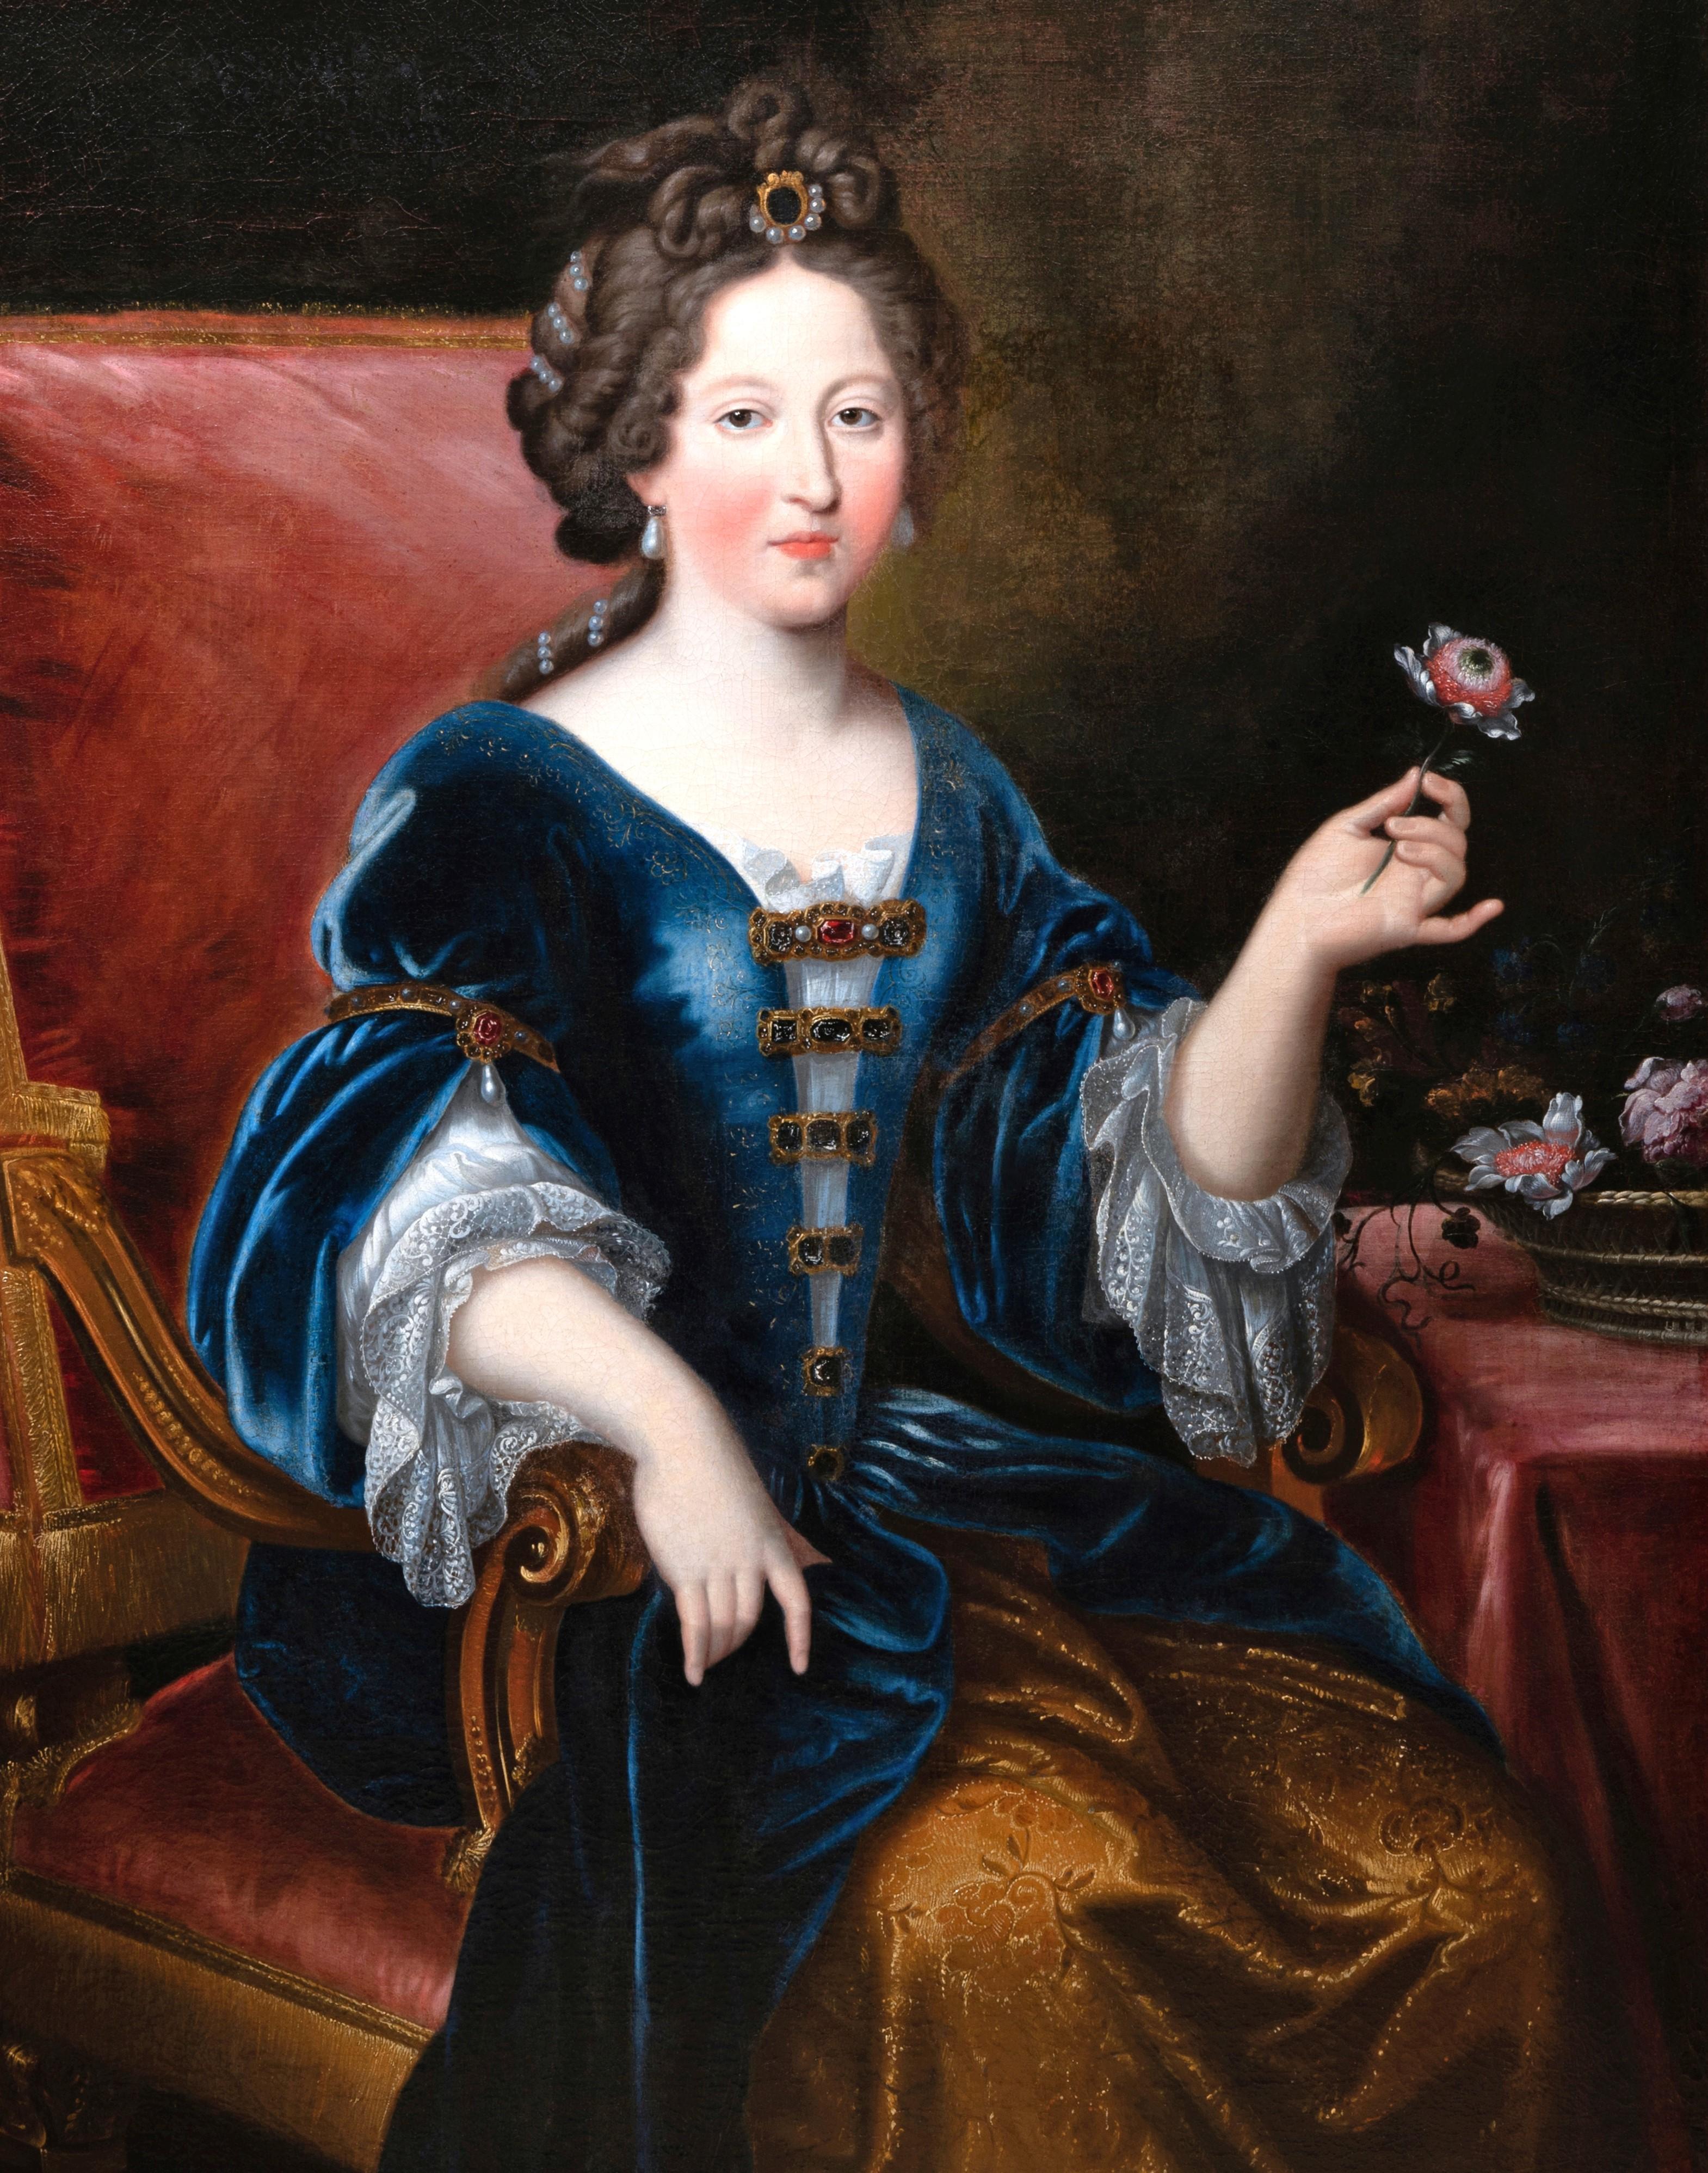 17th c. French school, French Princess Marie-Louise d'Orleans, attr. P. Mignard - Painting by Pierre Mignard